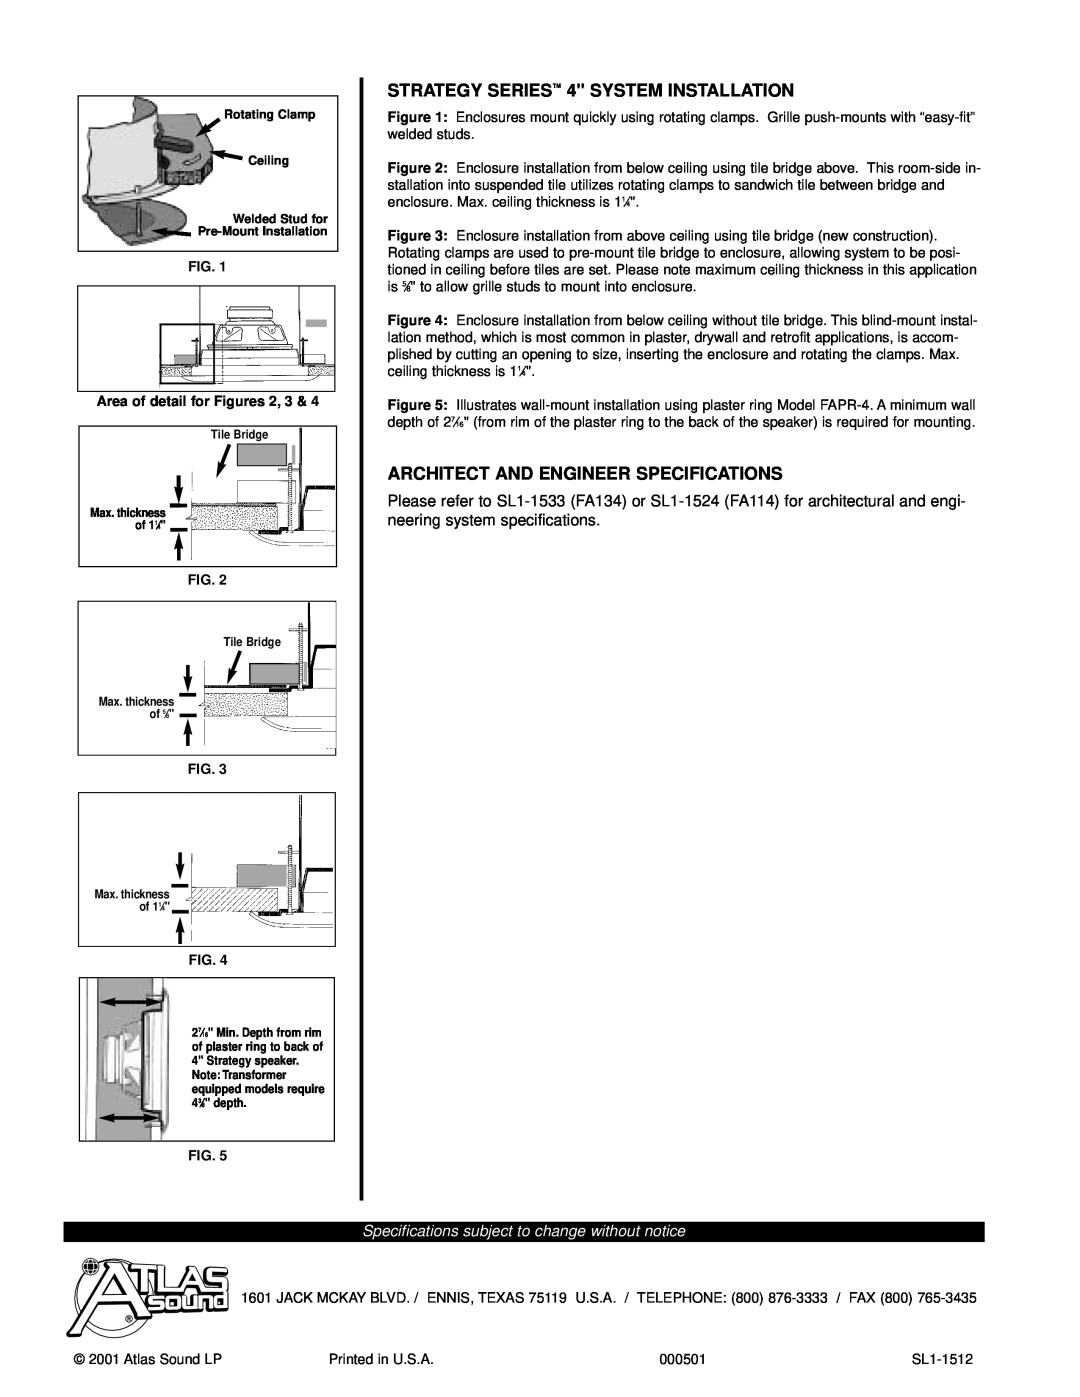 Atlas Sound FA95-4, FA97-4 specifications STRATEGY SERIES 4 SYSTEM INSTALLATION, Architect And Engineer Specifications 